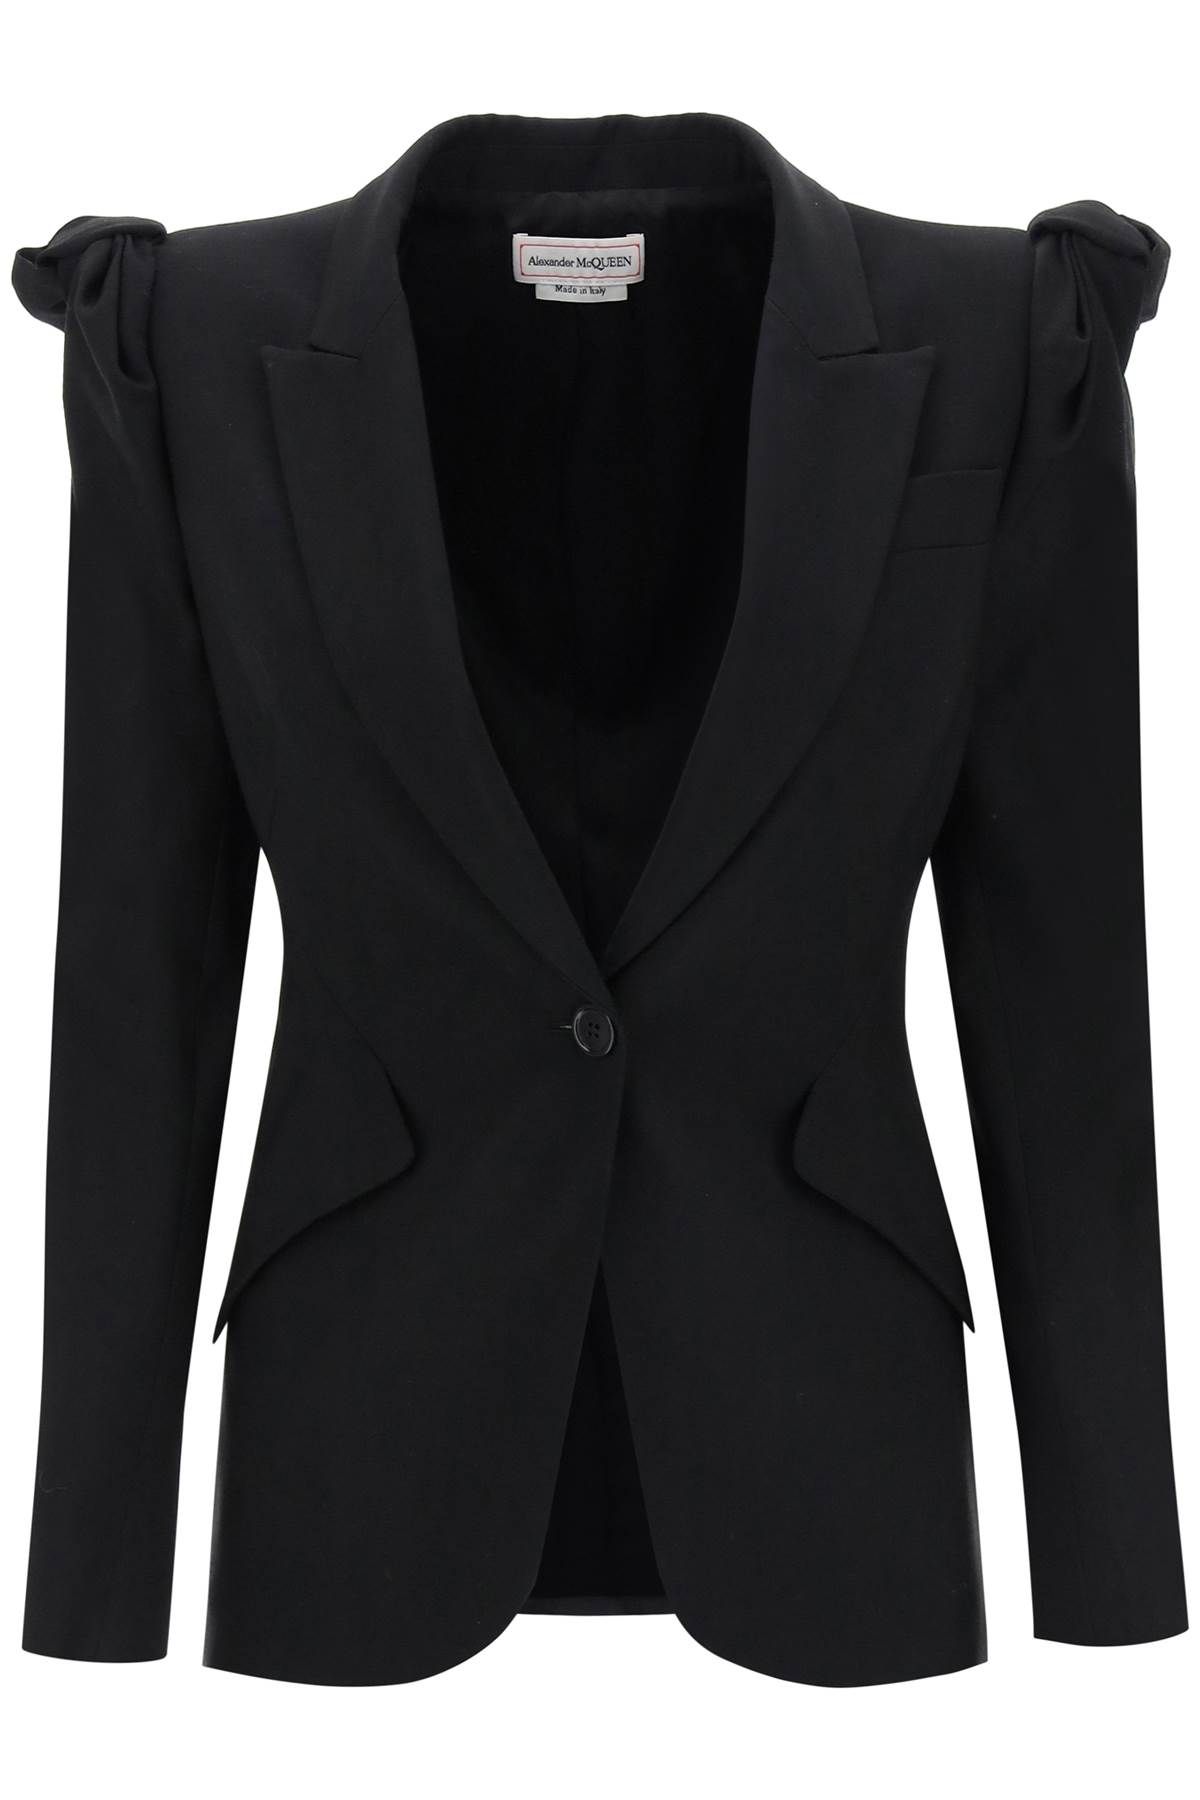 ALEXANDER MCQUEEN JACKET WITH KNOTTED SHOULDERS